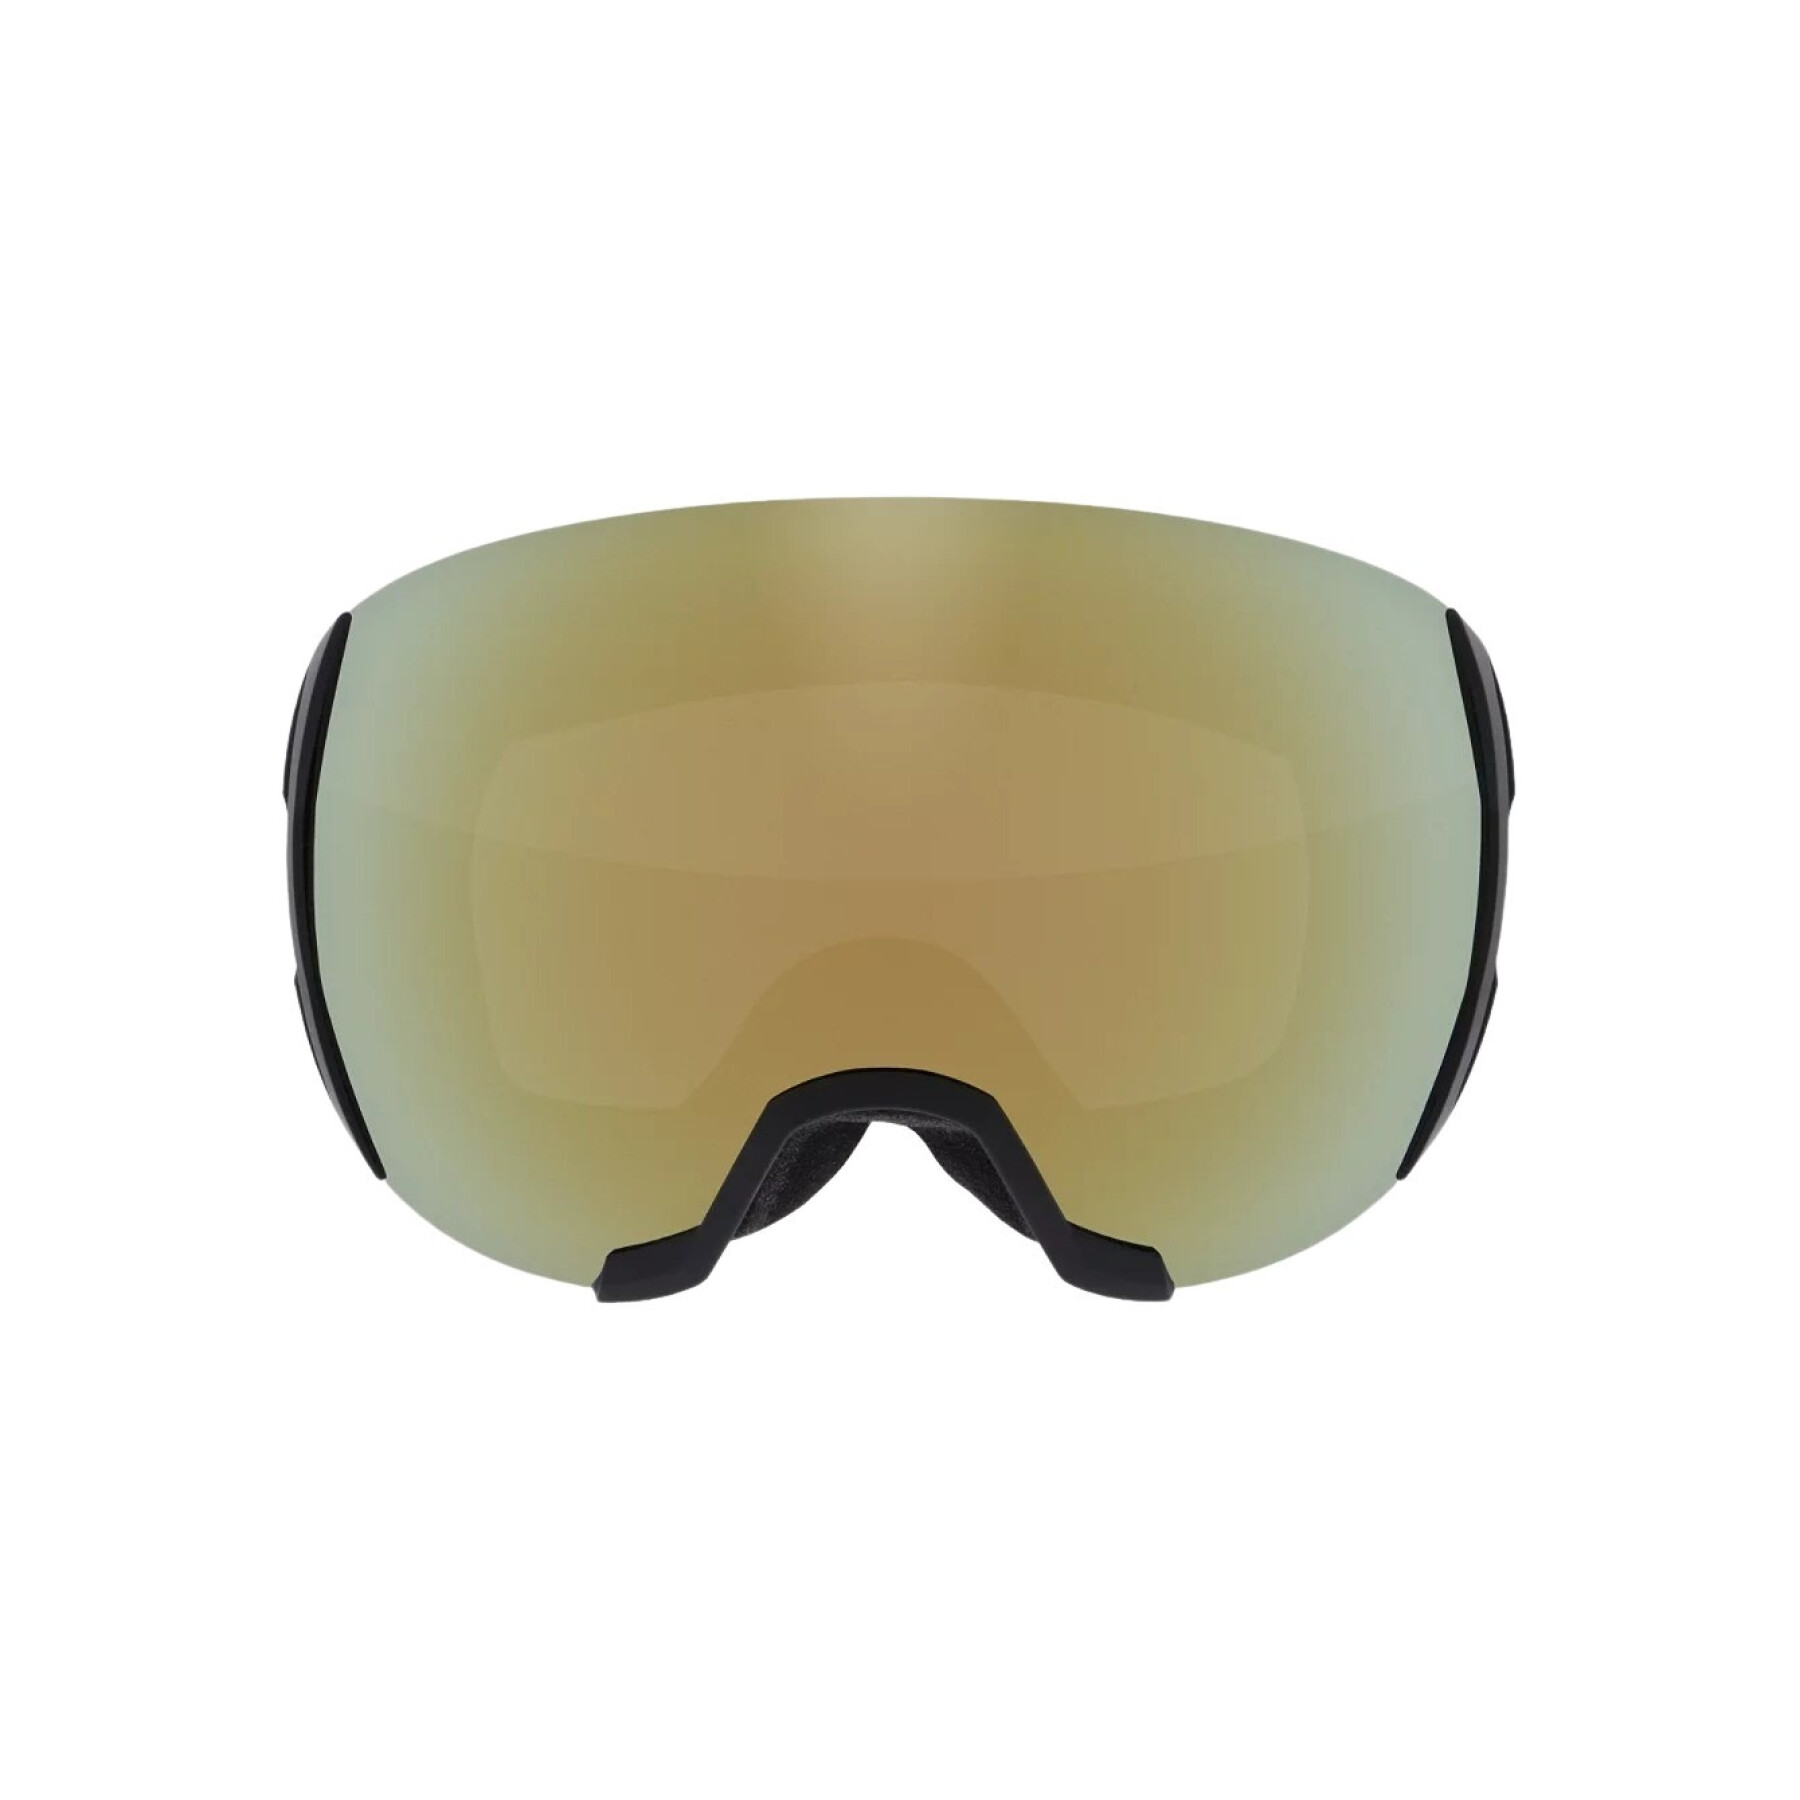 Masque Red Bull Spect Sight-005